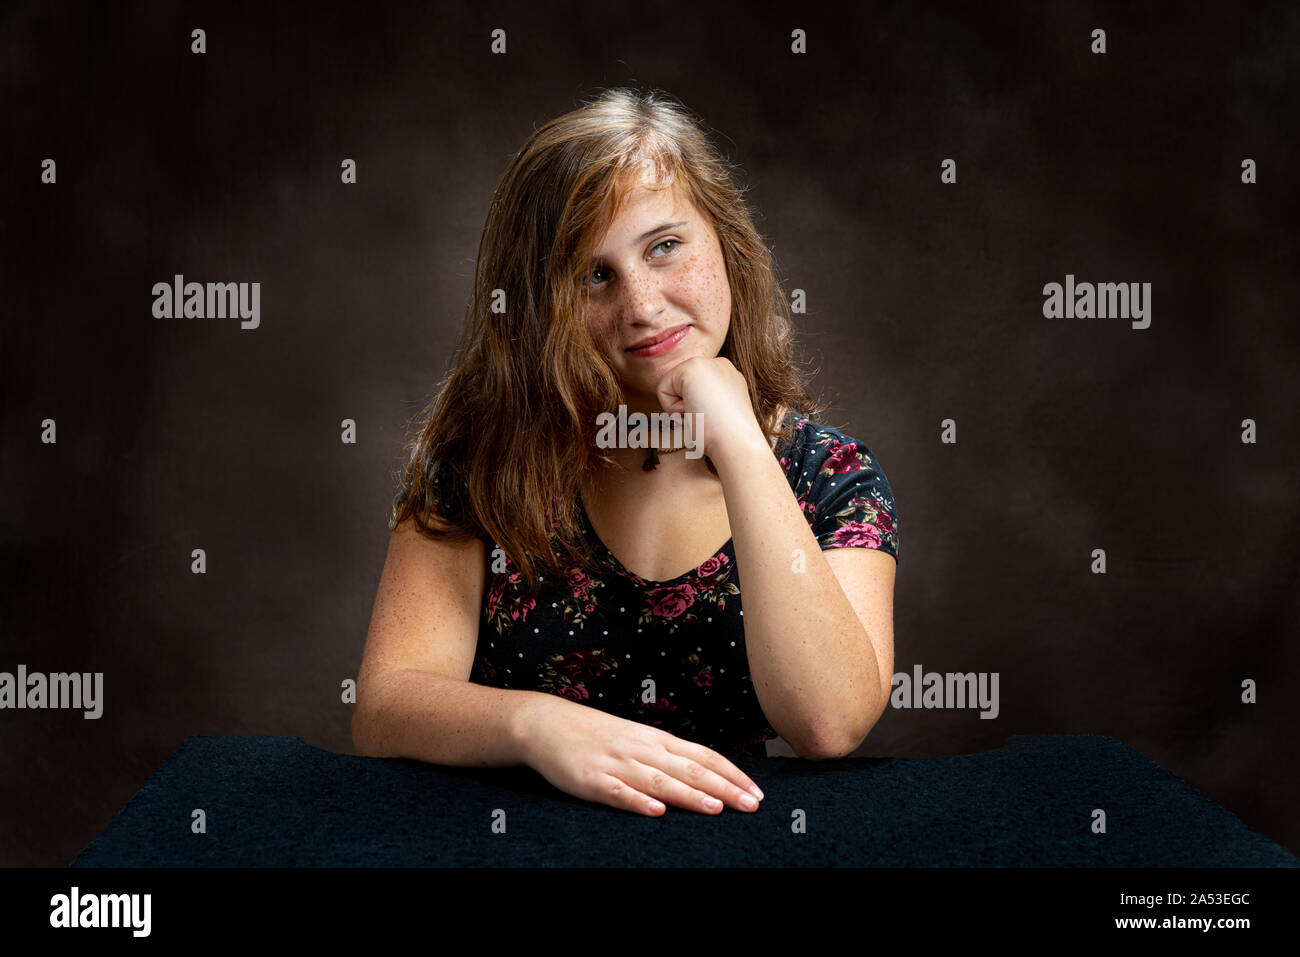 Horizontal studio shot of an amused pre-teen young lady listening to someone talk.  Her head is resting on her hand and is slightly tilted to one side Stock Photo